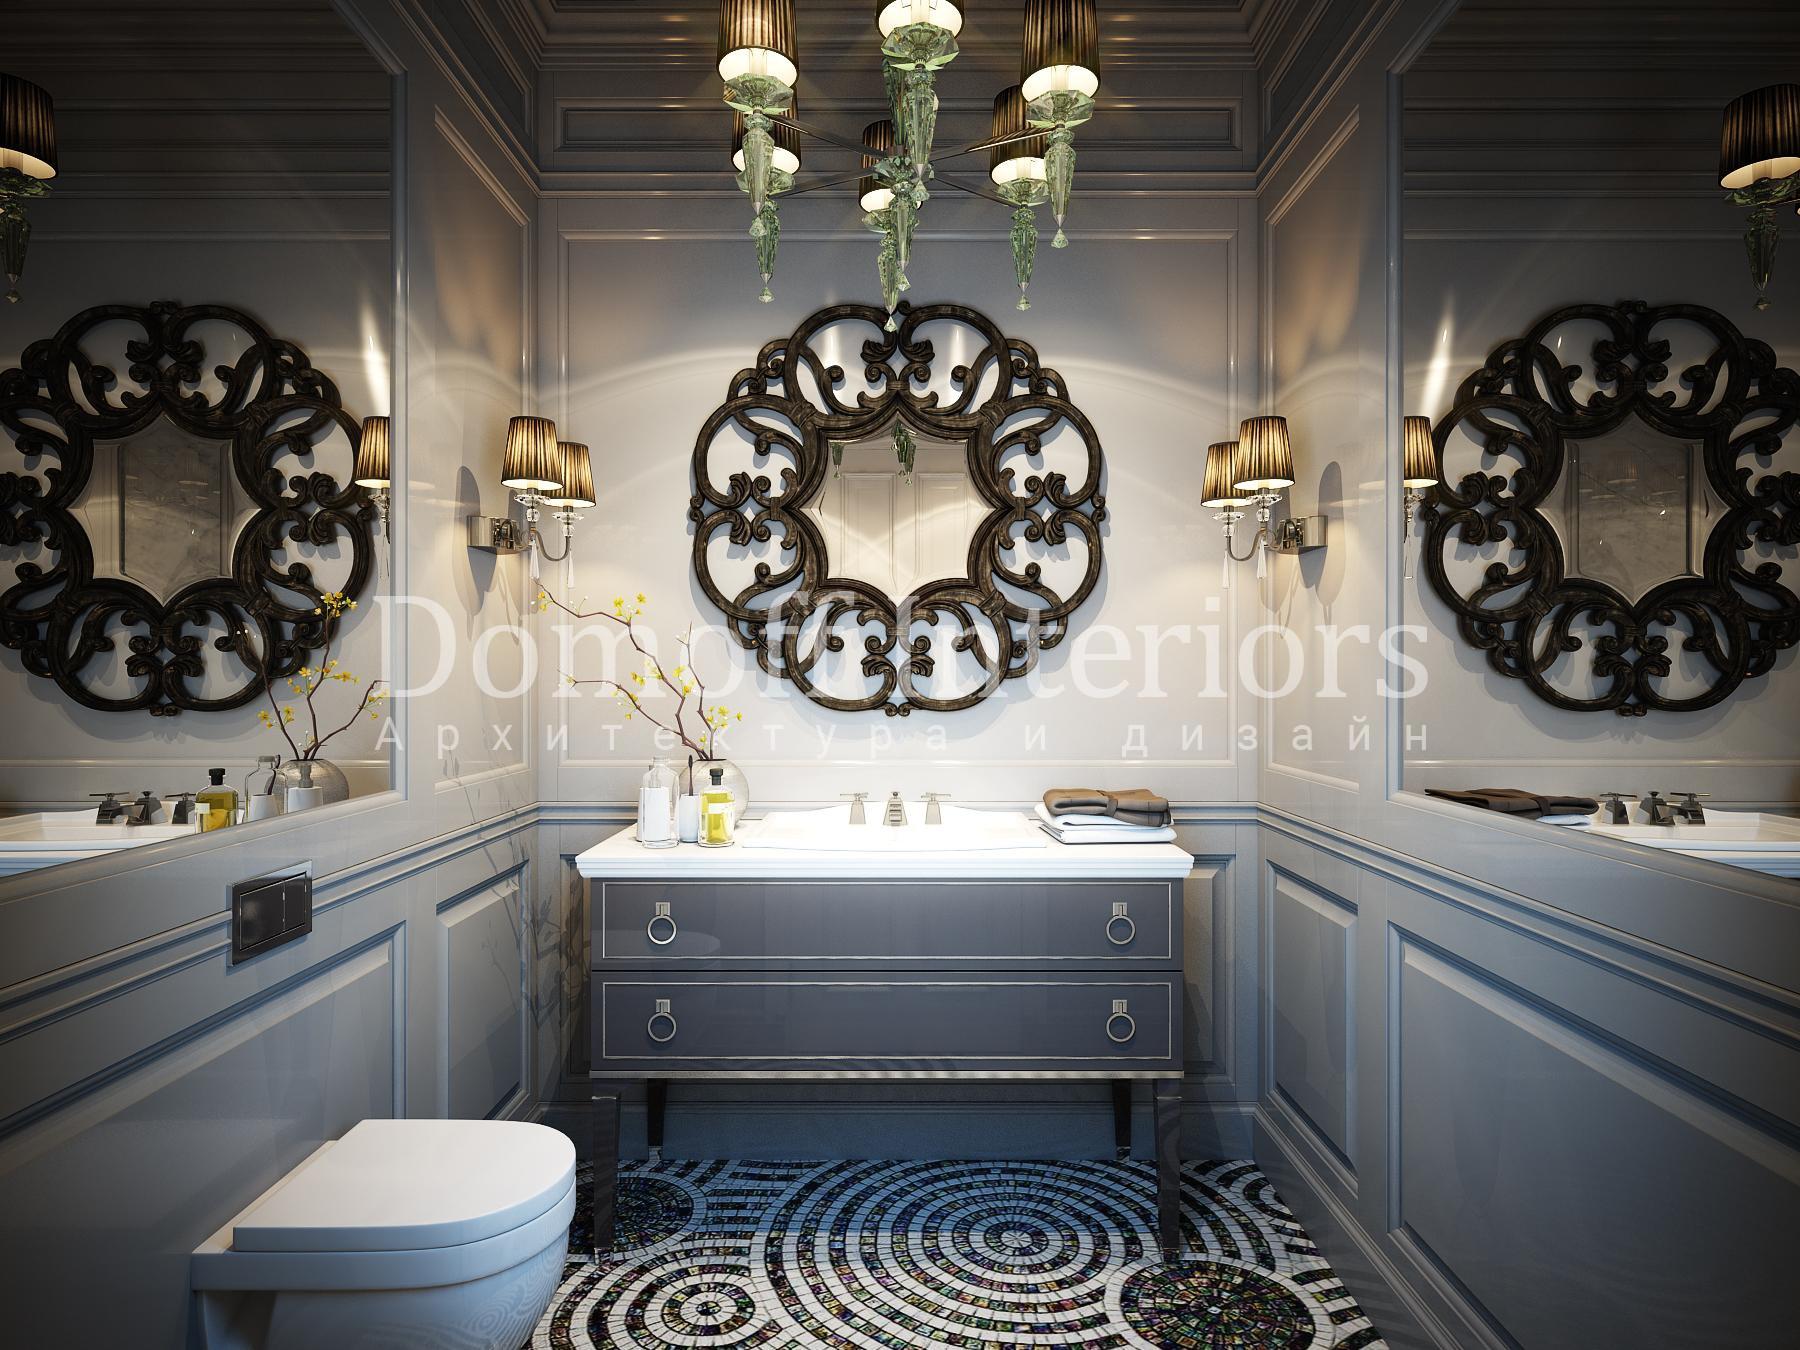 Guest bathroom made in the style of Contemporary Eclecticism